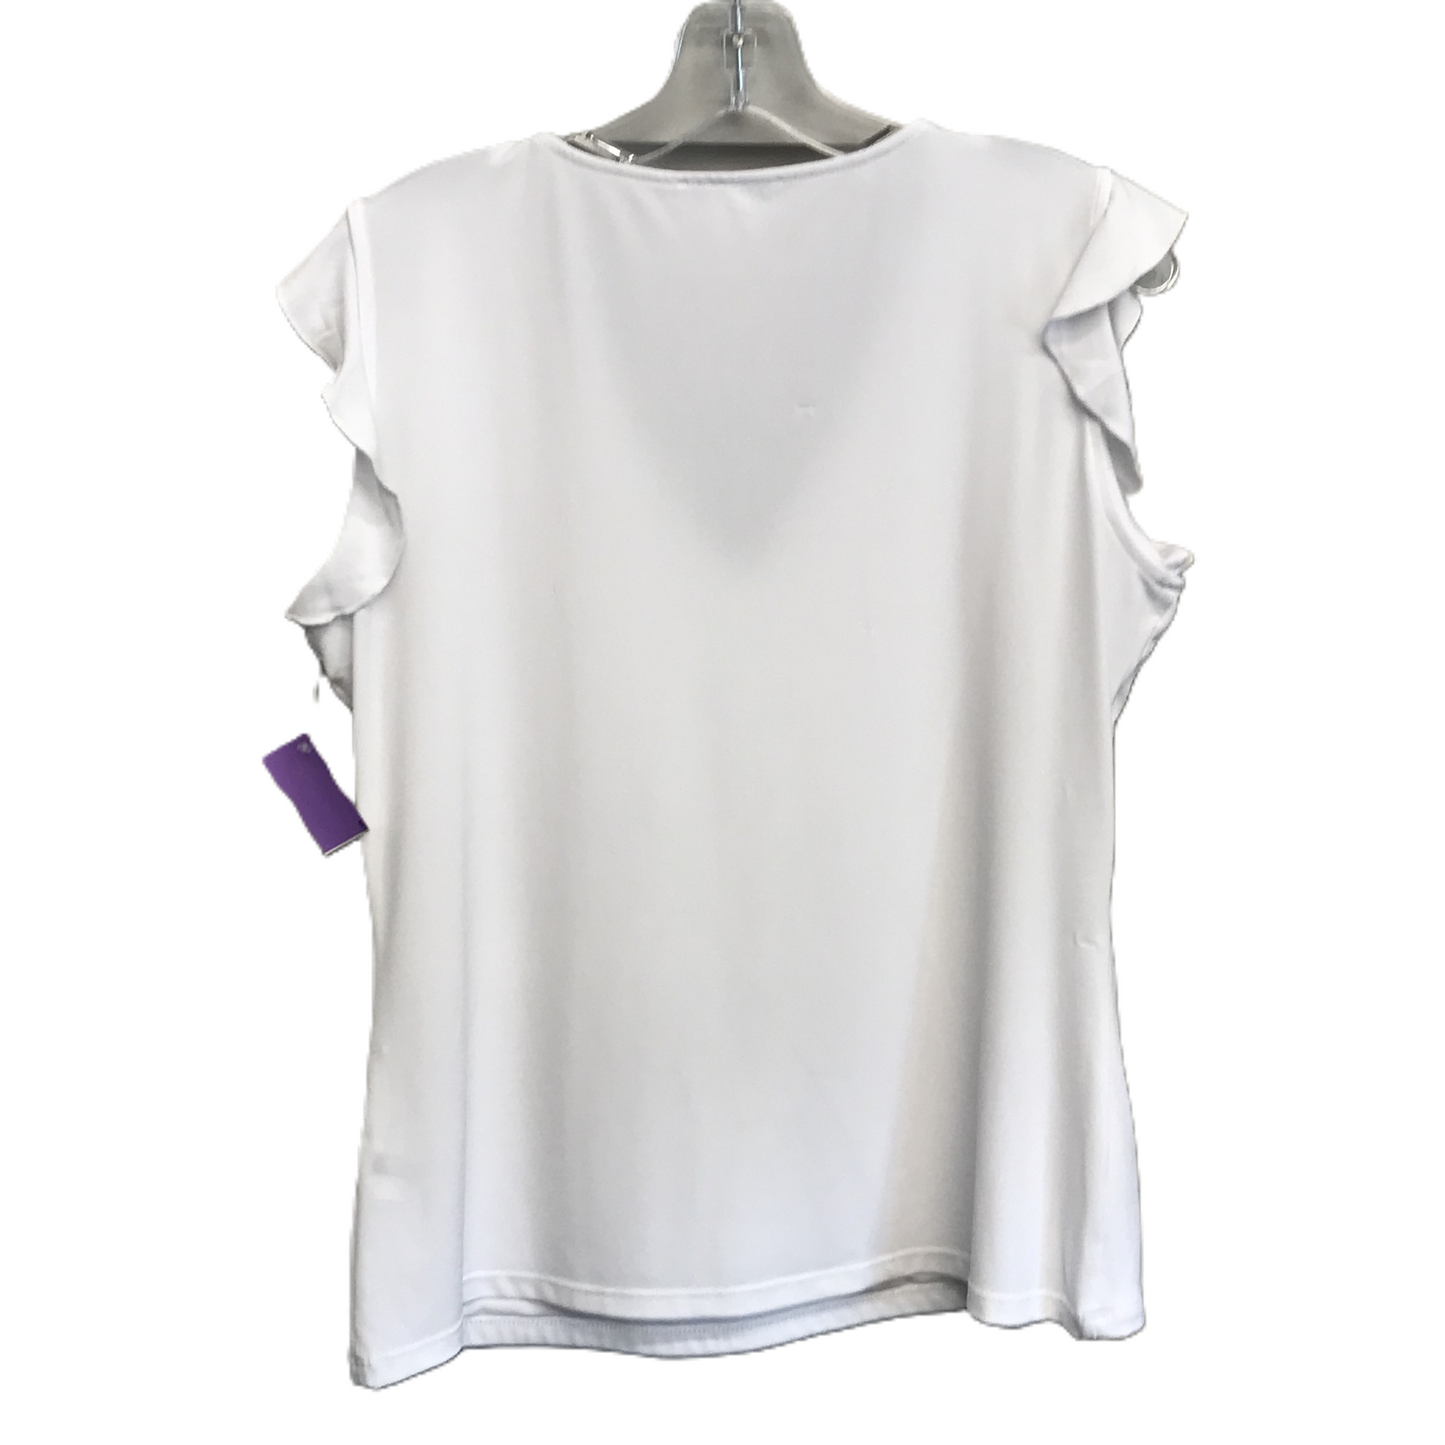 White Top Short Sleeve By Calvin Klein, Size: L